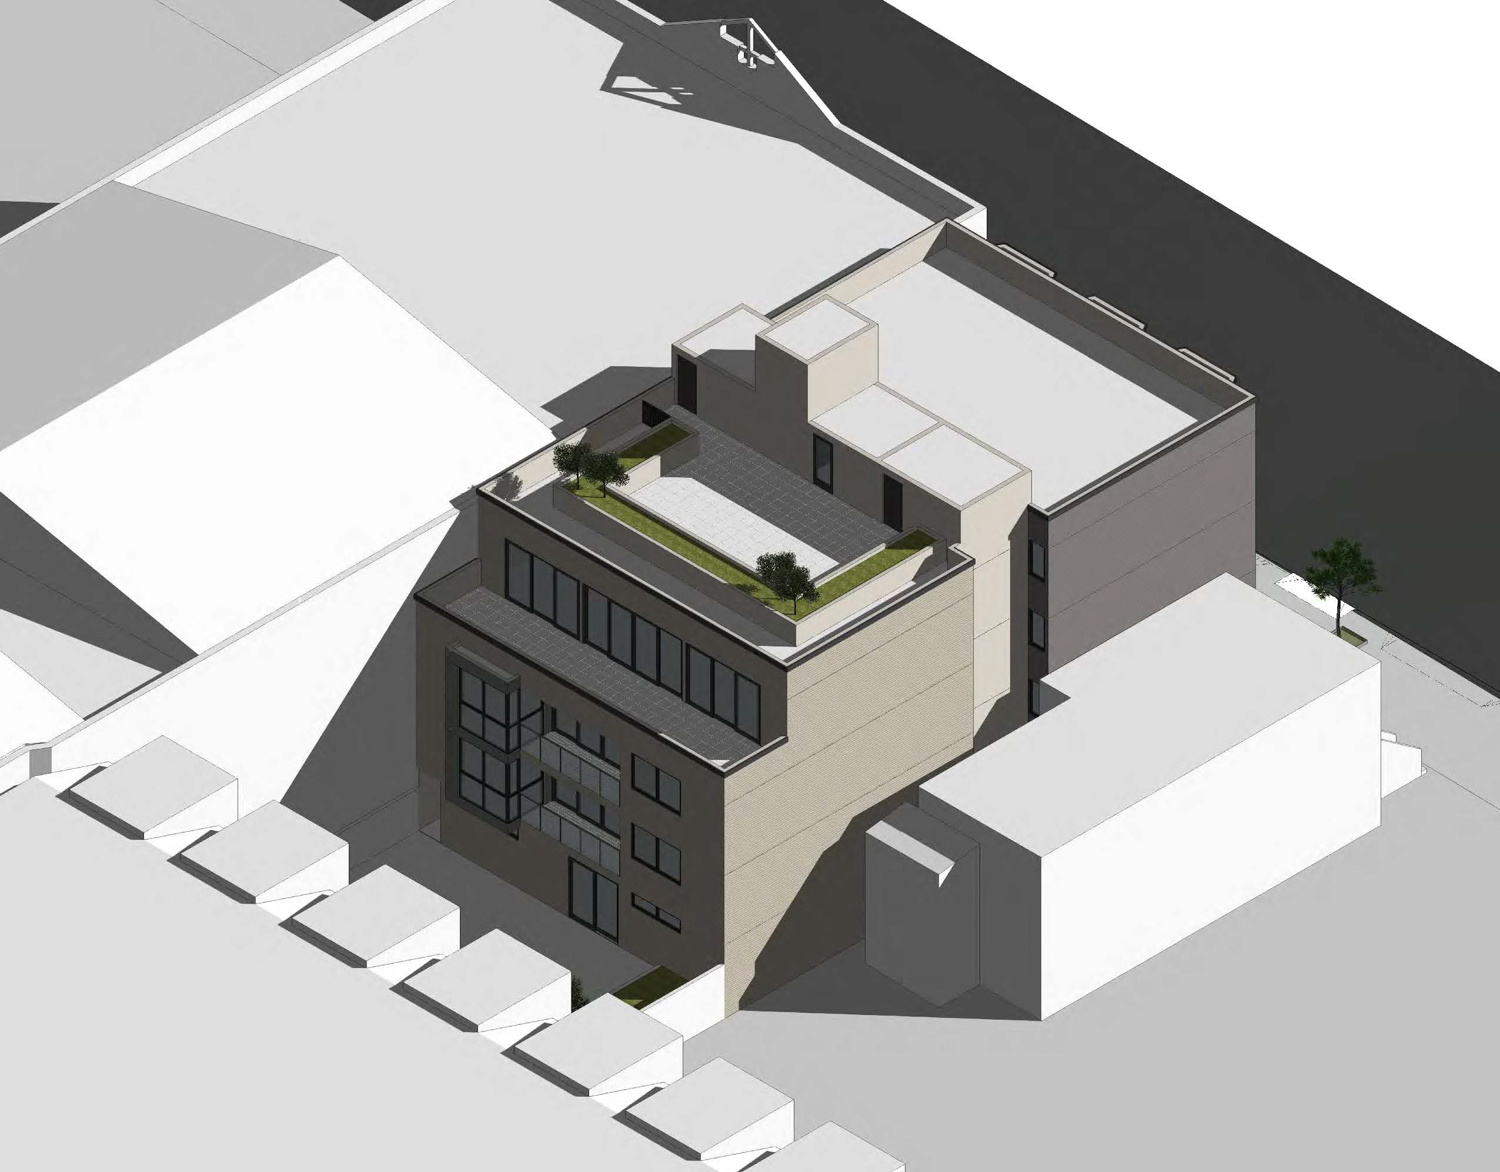 733 Treat Avenue, isometric aerial view of the inner-block facade, rendering by SIA Consulting